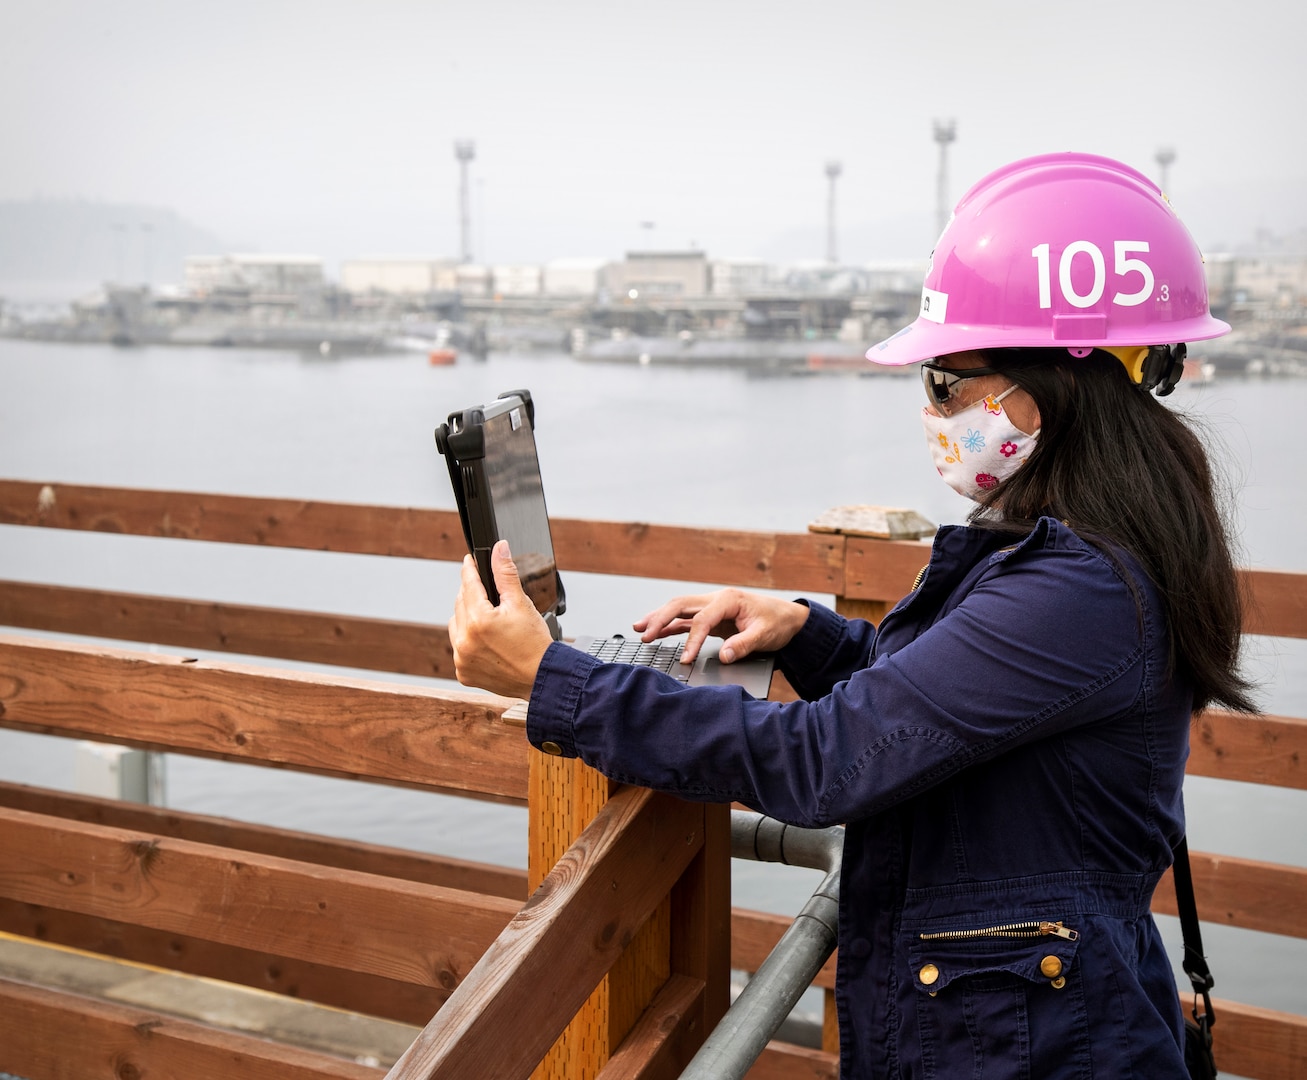 Anh Tran with Code 105, Radiological Controls, uses a tablet while conducting work on the Puget Sound Naval Shipyard & Intermediate Maintenance Facility waterfront as part of the command’s Mobile Workforce Enablement initiative, which increases efficiency, reduces delays and puts valuable information within reach of employees, wherever they are working. (PSNS & IMF photo by Wendy Hallmark)